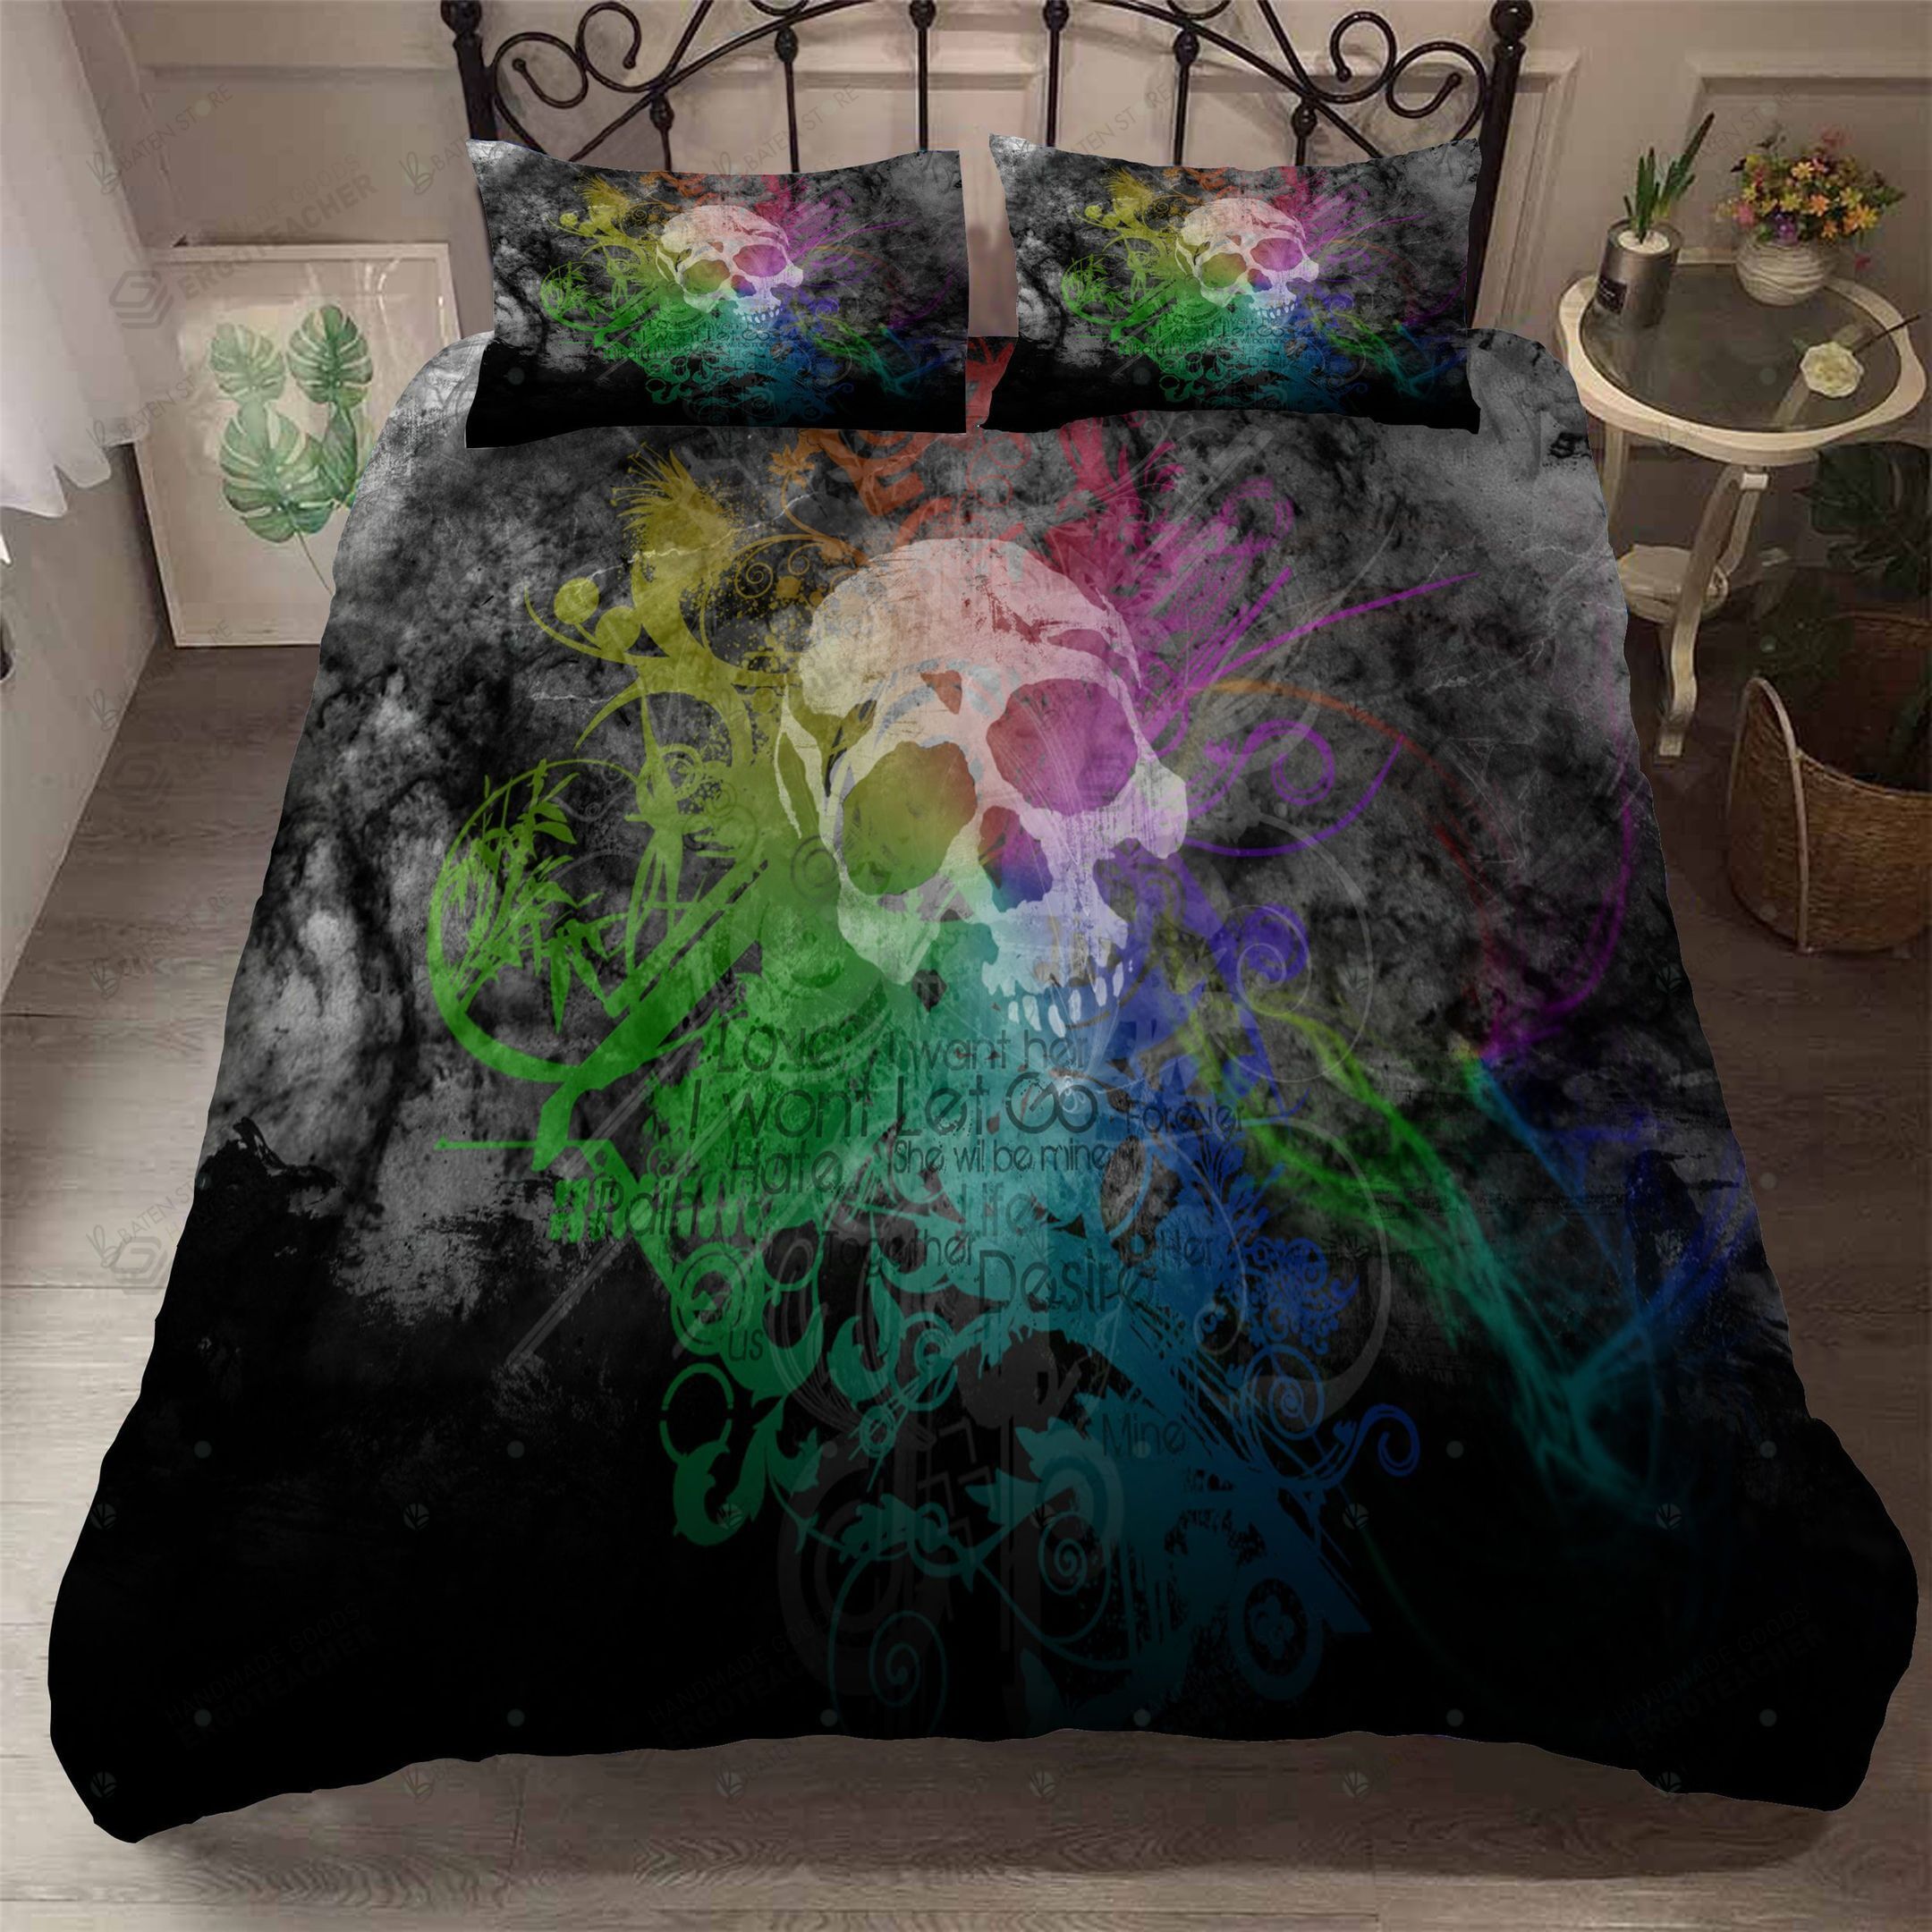 Details about   3D Skull Strings Musical I475 Bed Pillowcases Duvet Cover Quilt Vincent Amy 